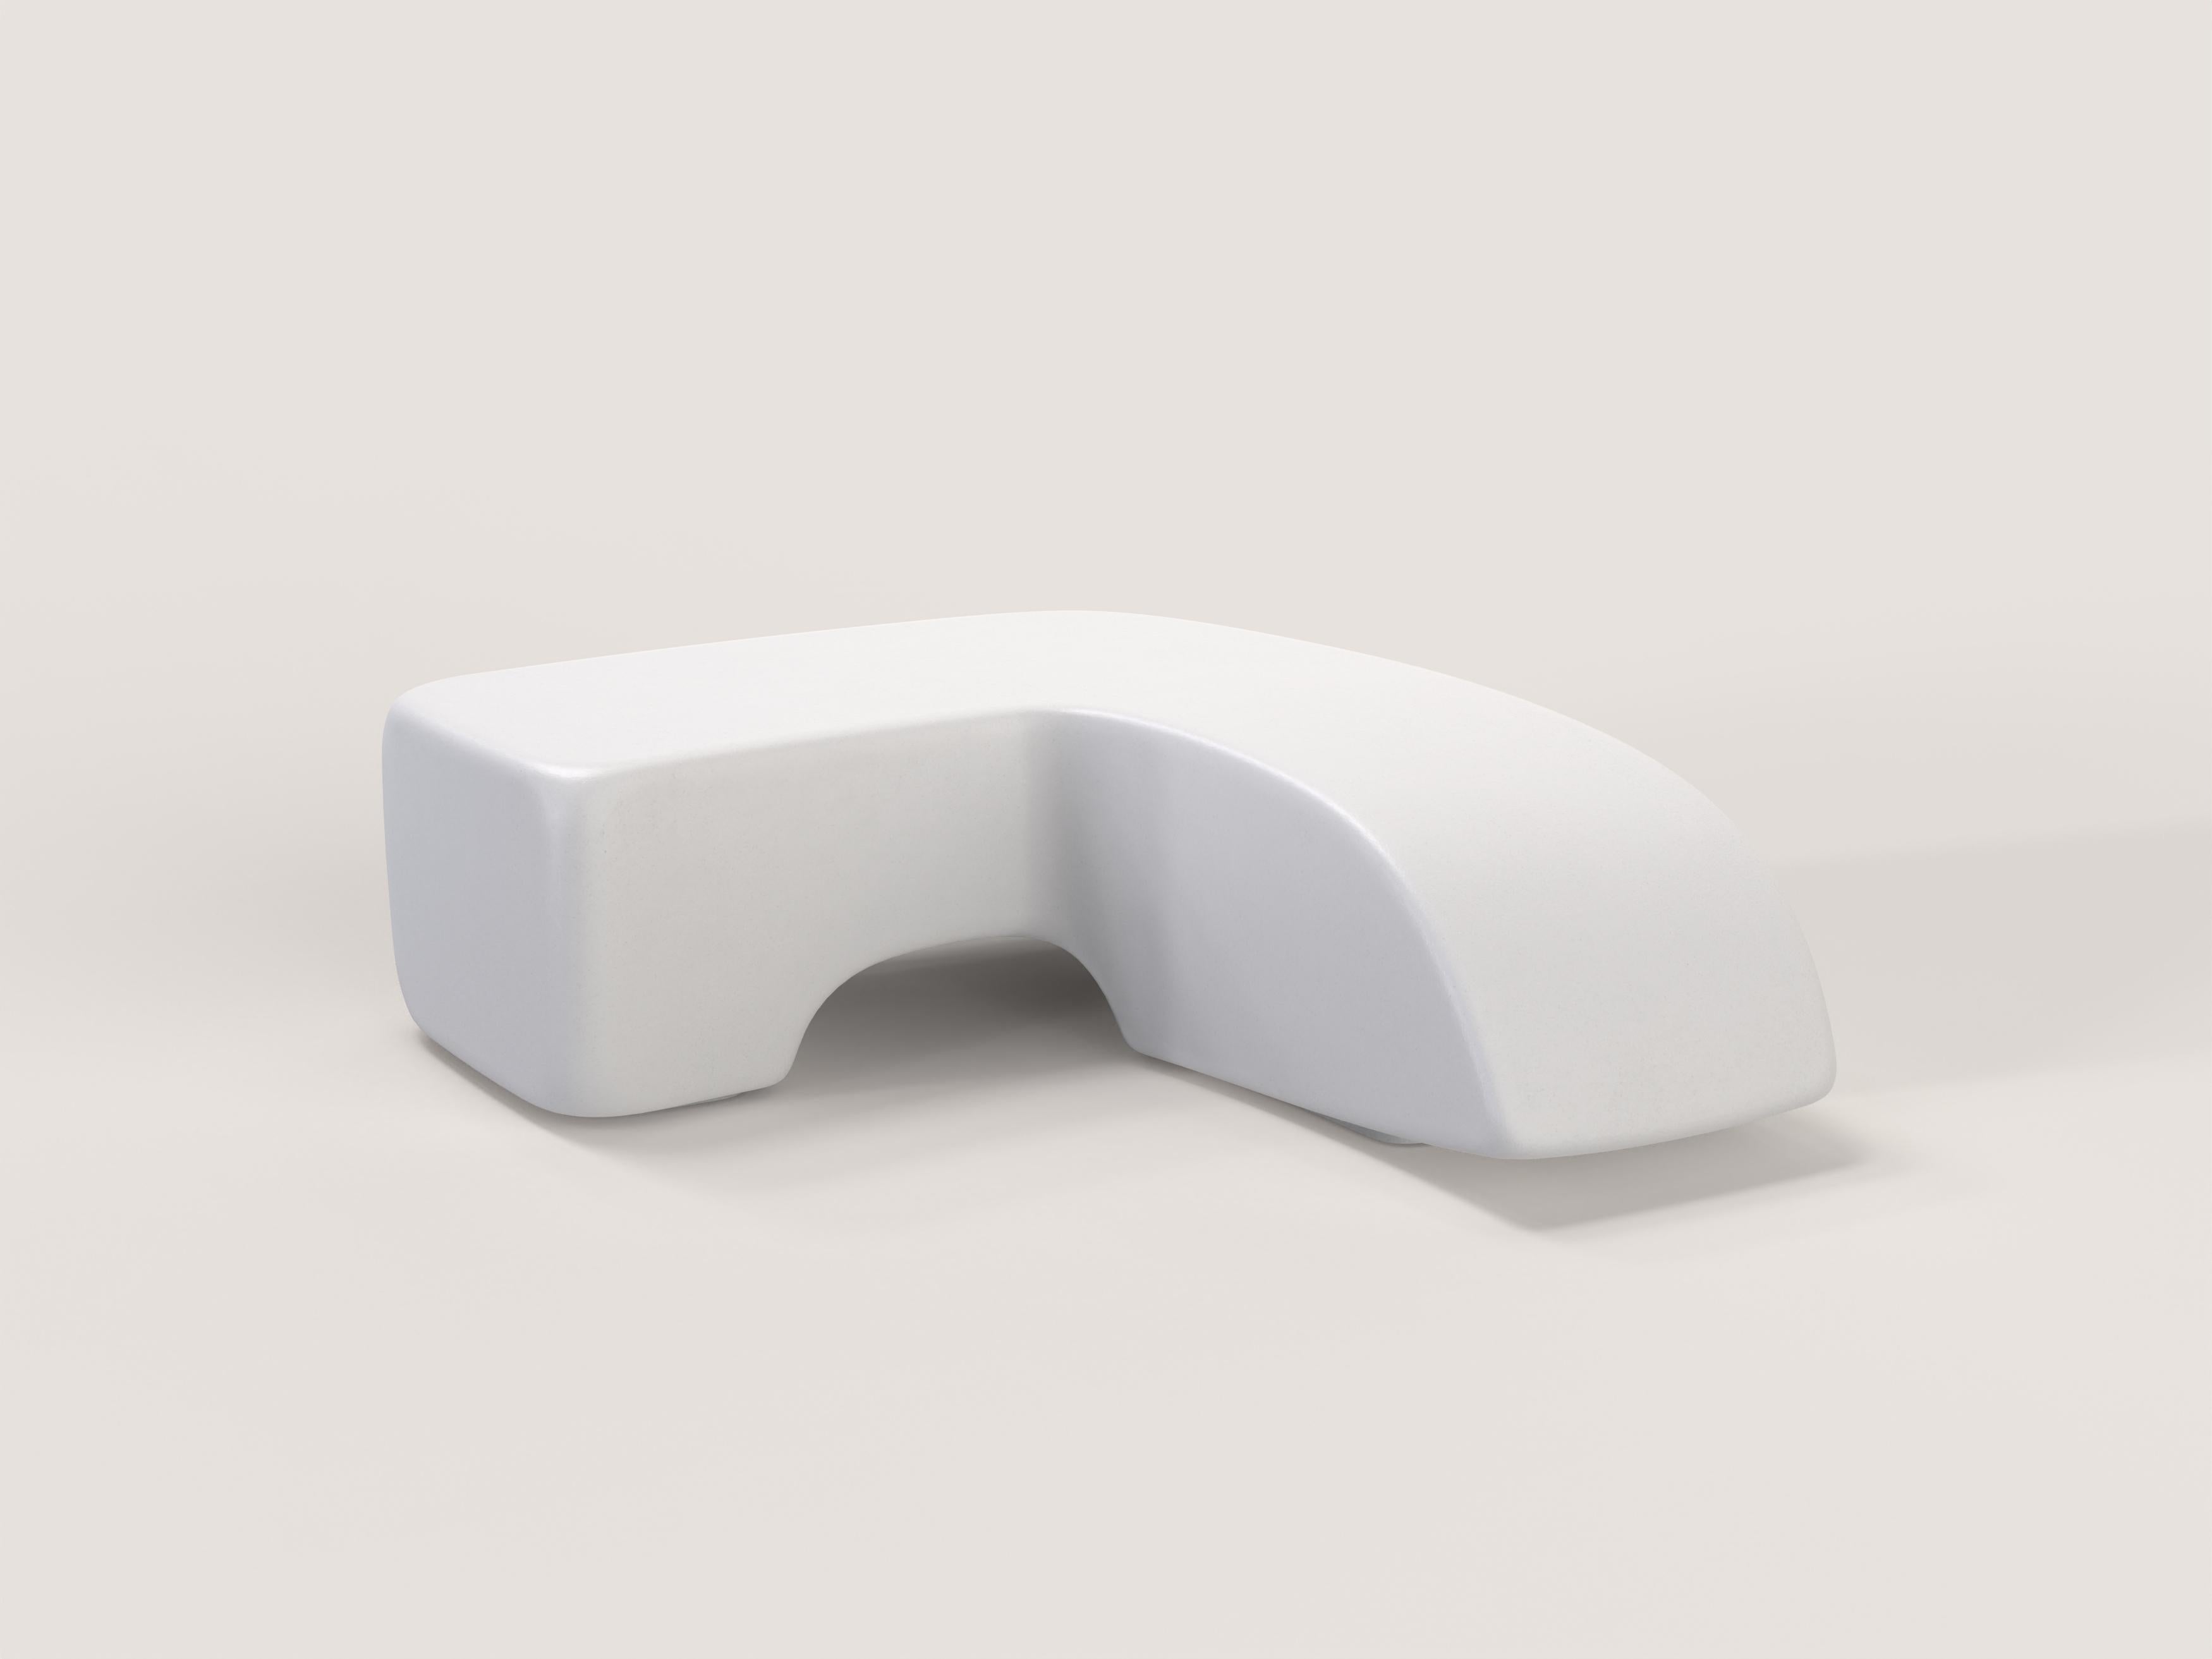 A large volume that seems almost bent and polished by erosion. A smooth and light resin sculpture that seems to be carved out of a large block of stone.
Objects are handcrafted in order to be unique. Limited edition of 150.
Every piece has a marked